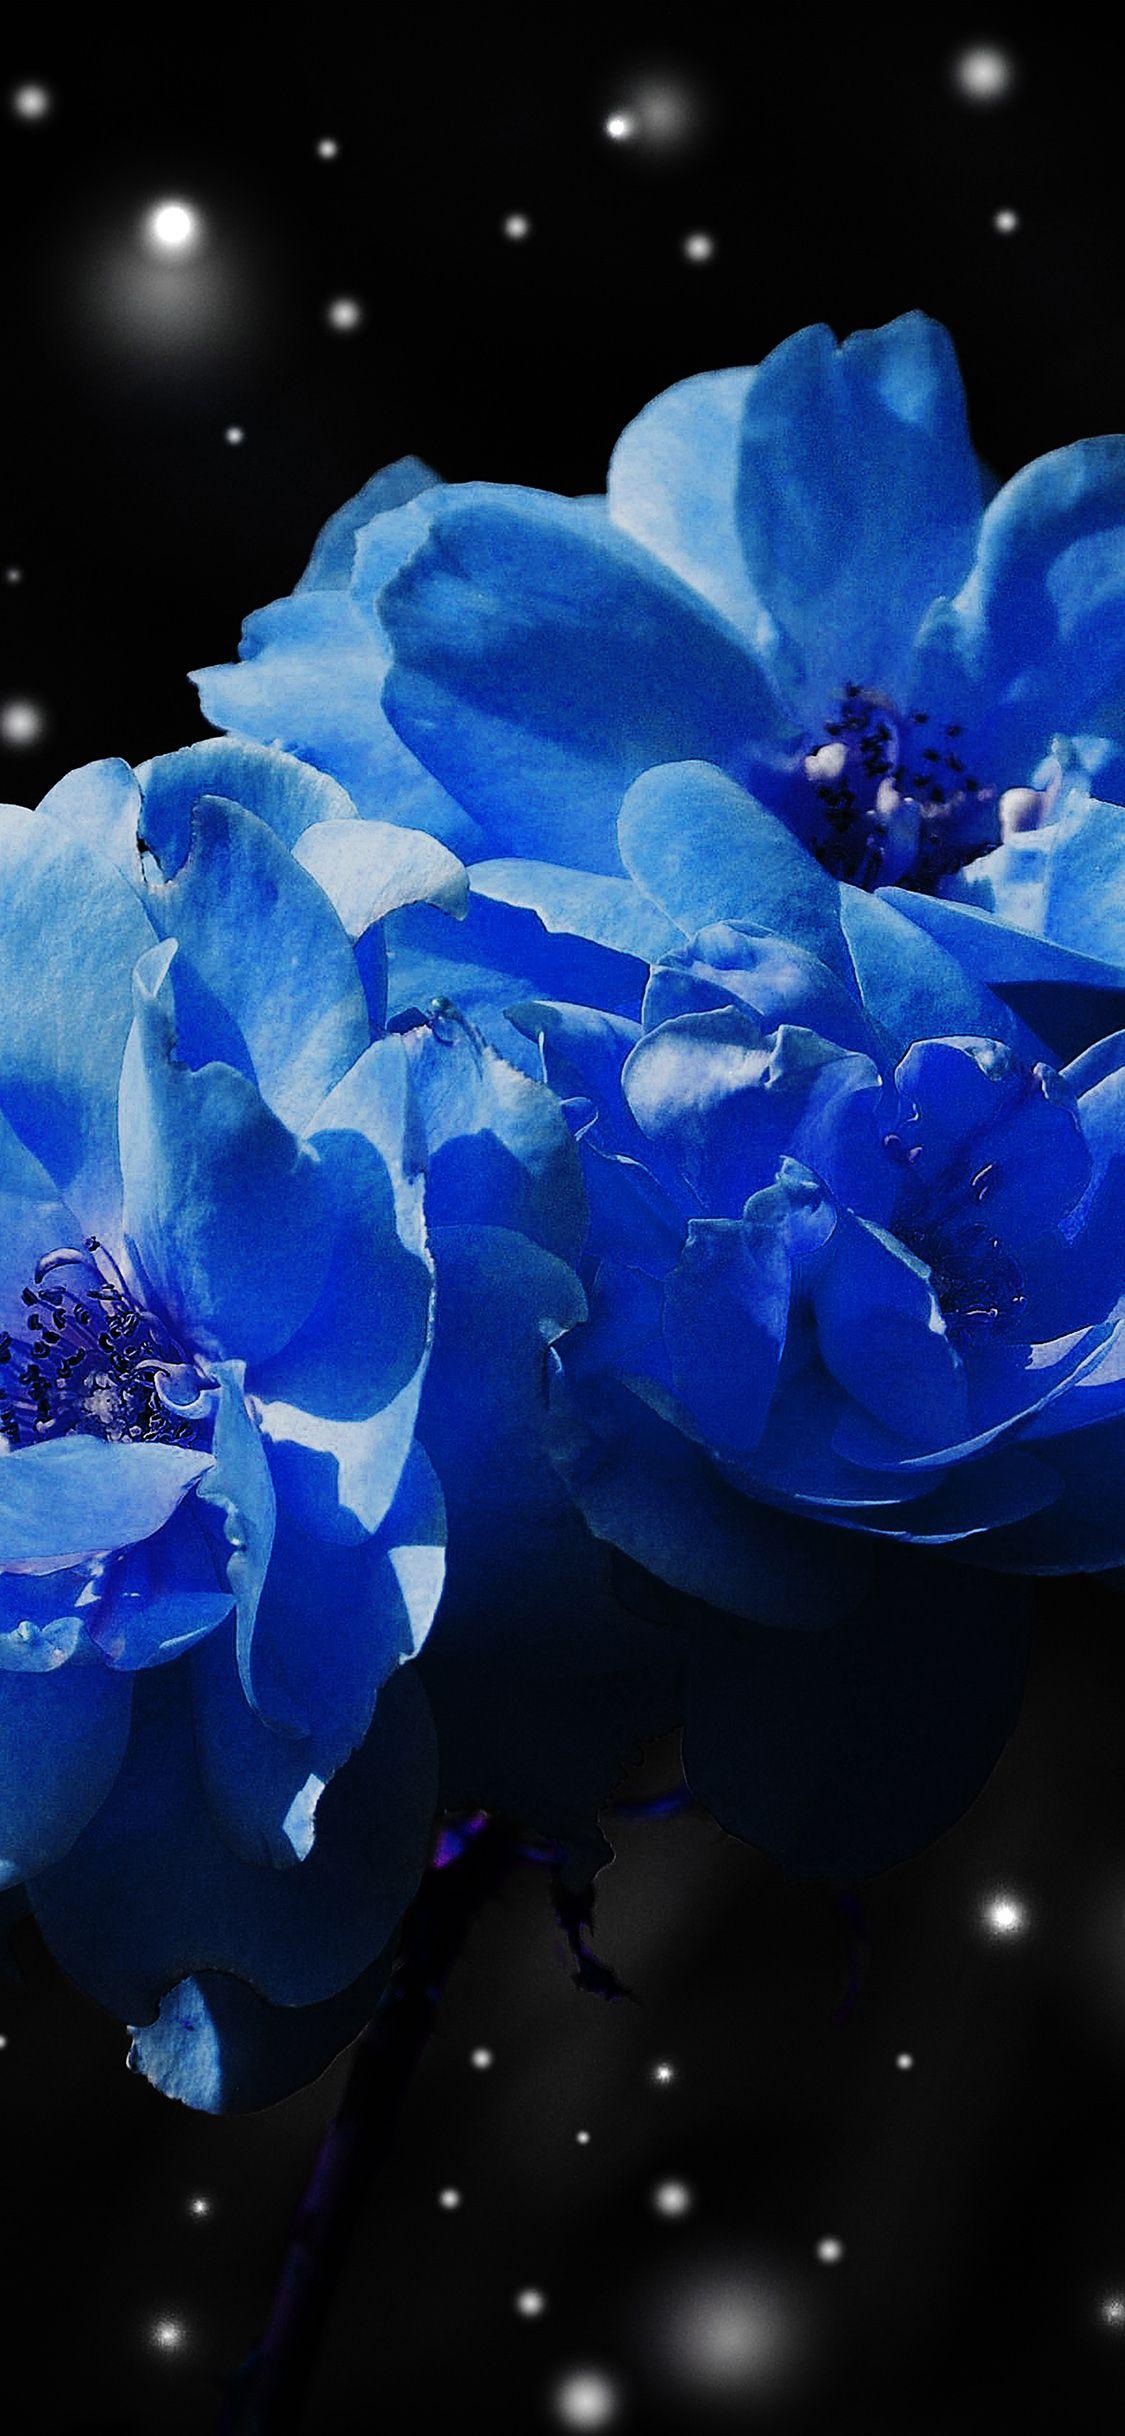 Blue Flower iPhone Wallpapers - Top Free Blue Flower iPhone Backgrounds